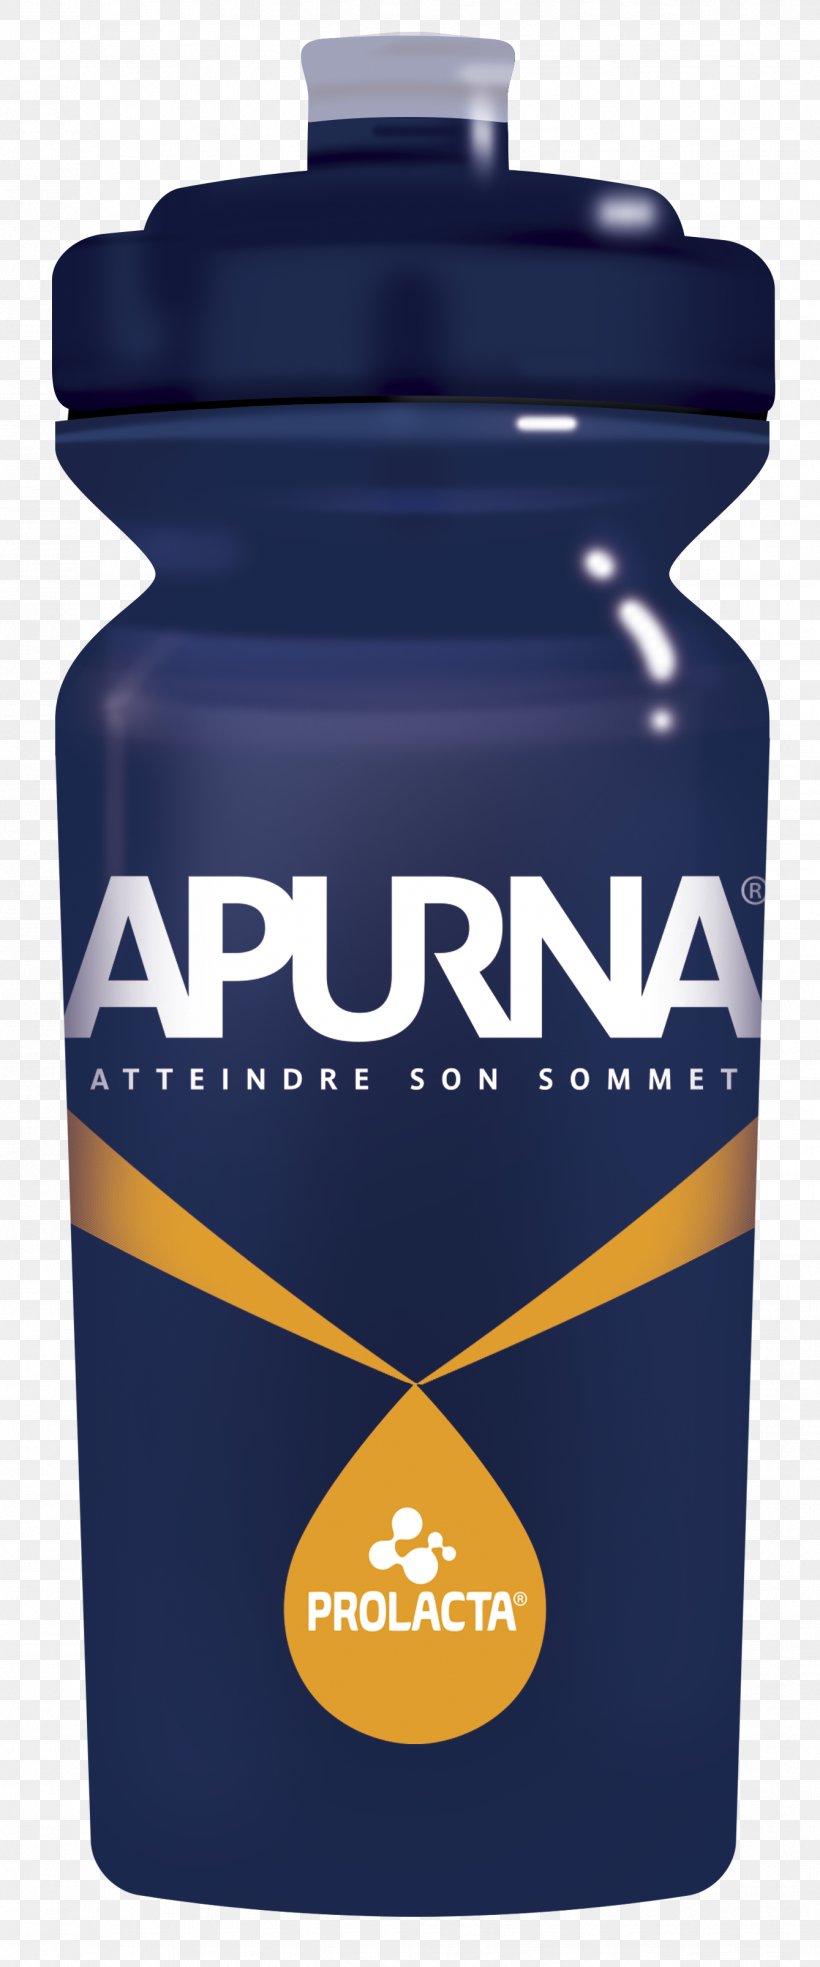 Sports & Energy Drinks Apurna Gainer, PNG, 1339x3212px, Sports Energy Drinks, Apurna, Article De Sport, Bottle, Drink Download Free